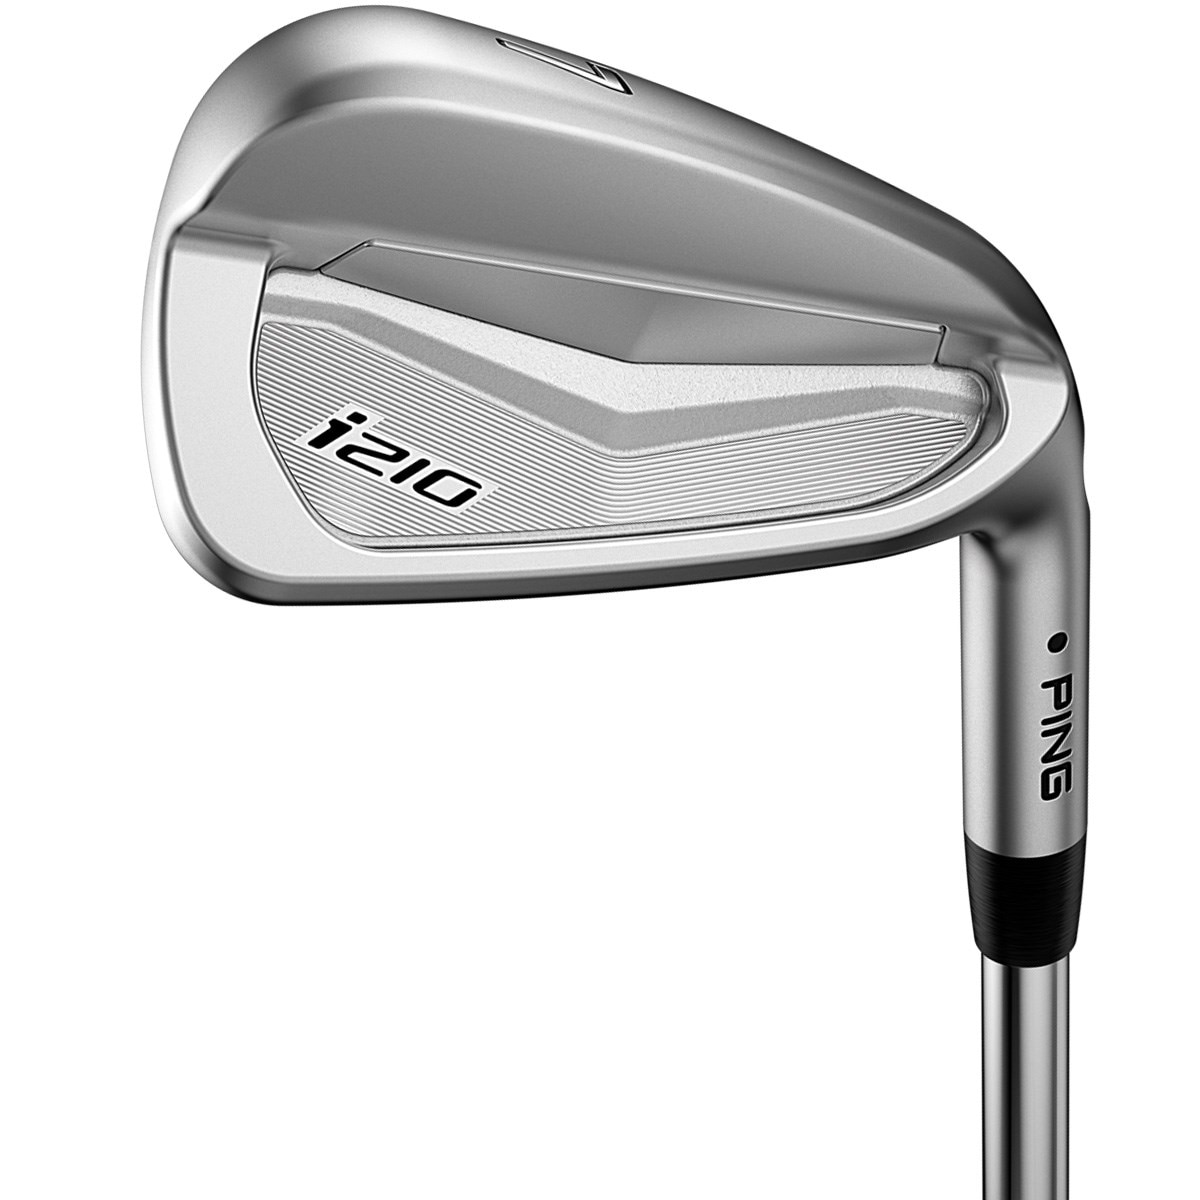 PING ピンi210アイアンセットDG tour issue EX - クラブ